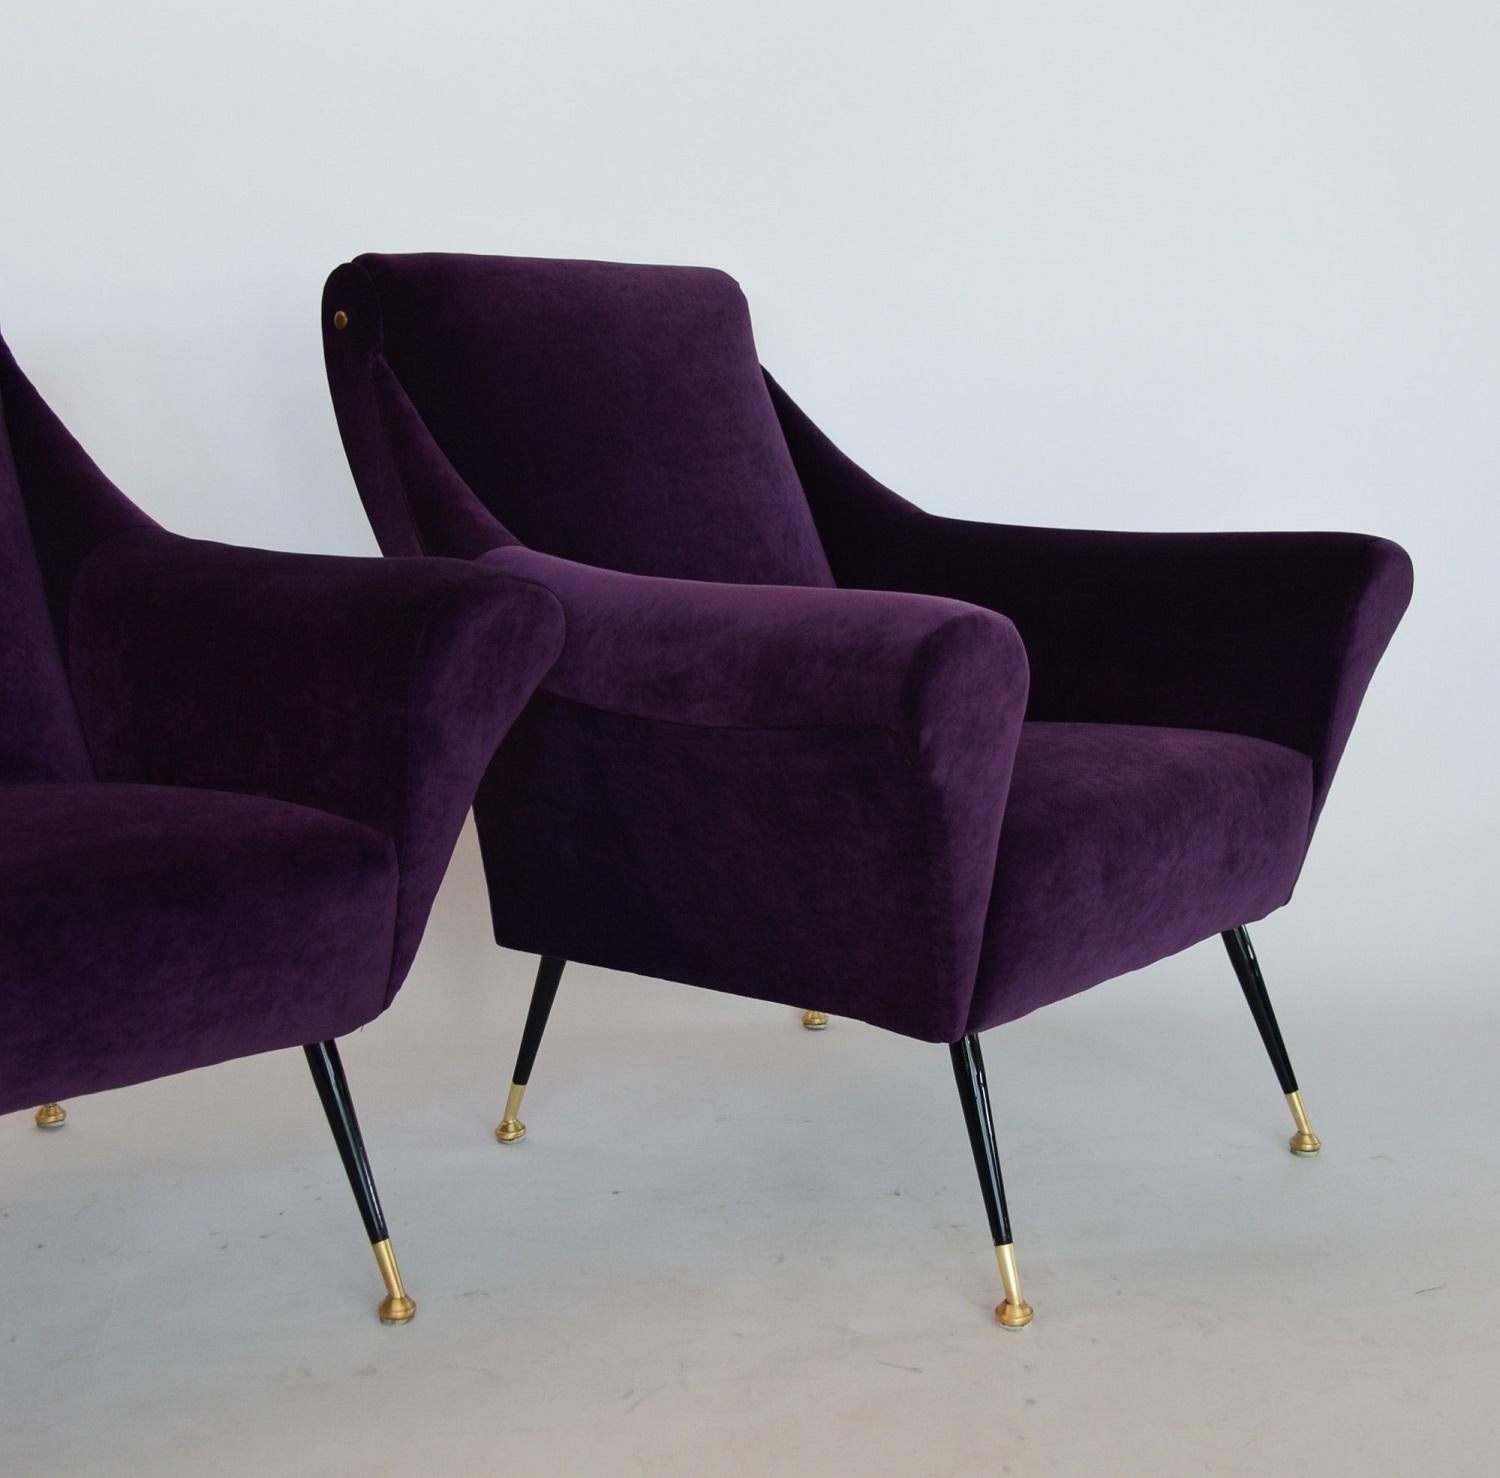 Brass Italian Armchairs or Lounge Chairs Restored in Purple Velvet, 1950s